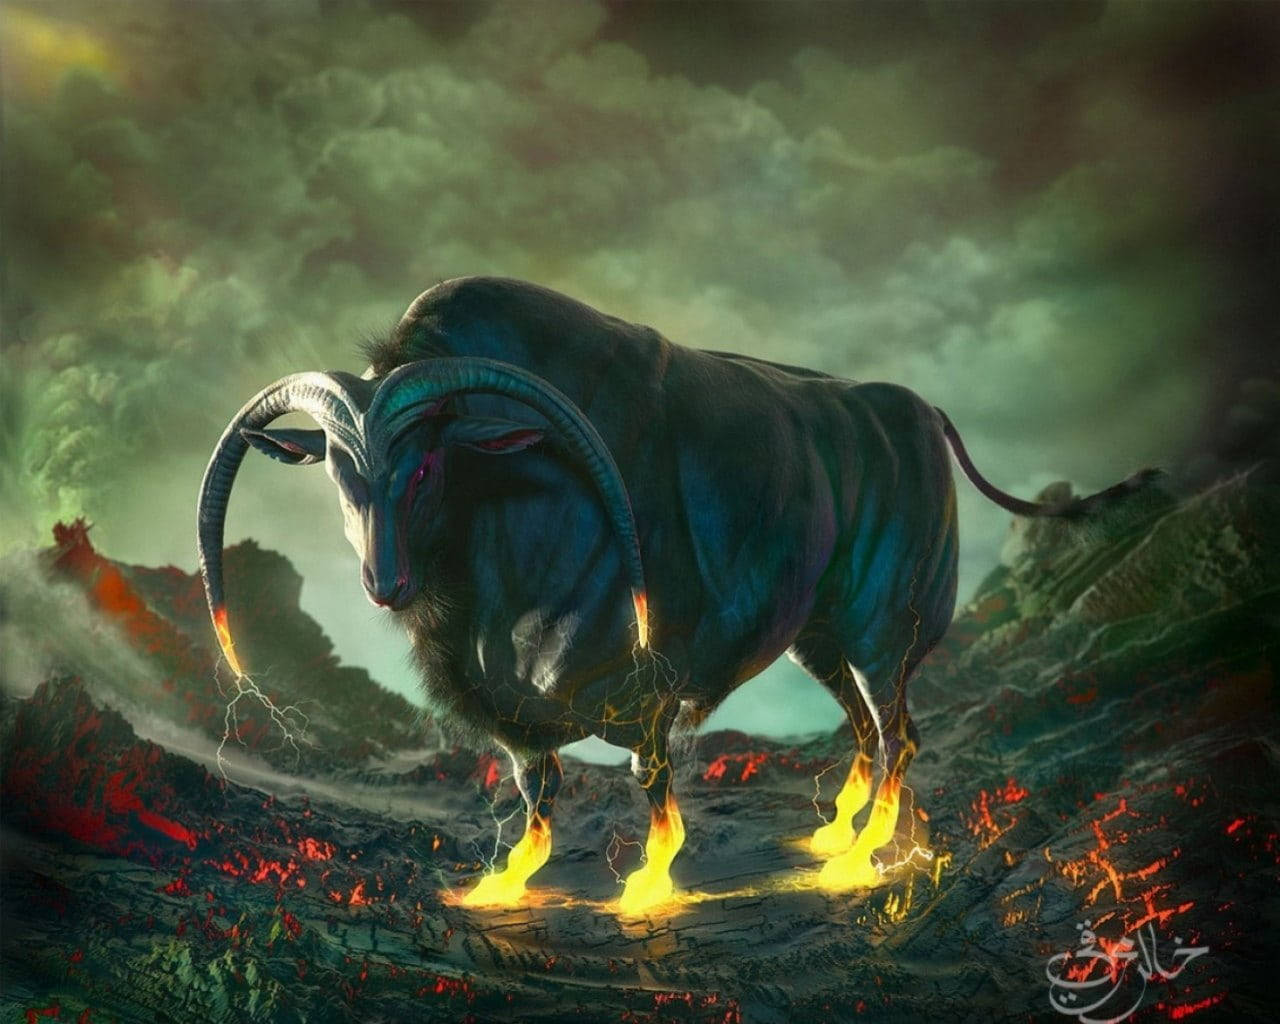 Download Red Taurus wallpaper by MrEddi  82  Free on ZEDGE now Browse  millions of popular 2014 Wallpapers and   Bulls wallpaper Taurus  wallpaper Taurus art